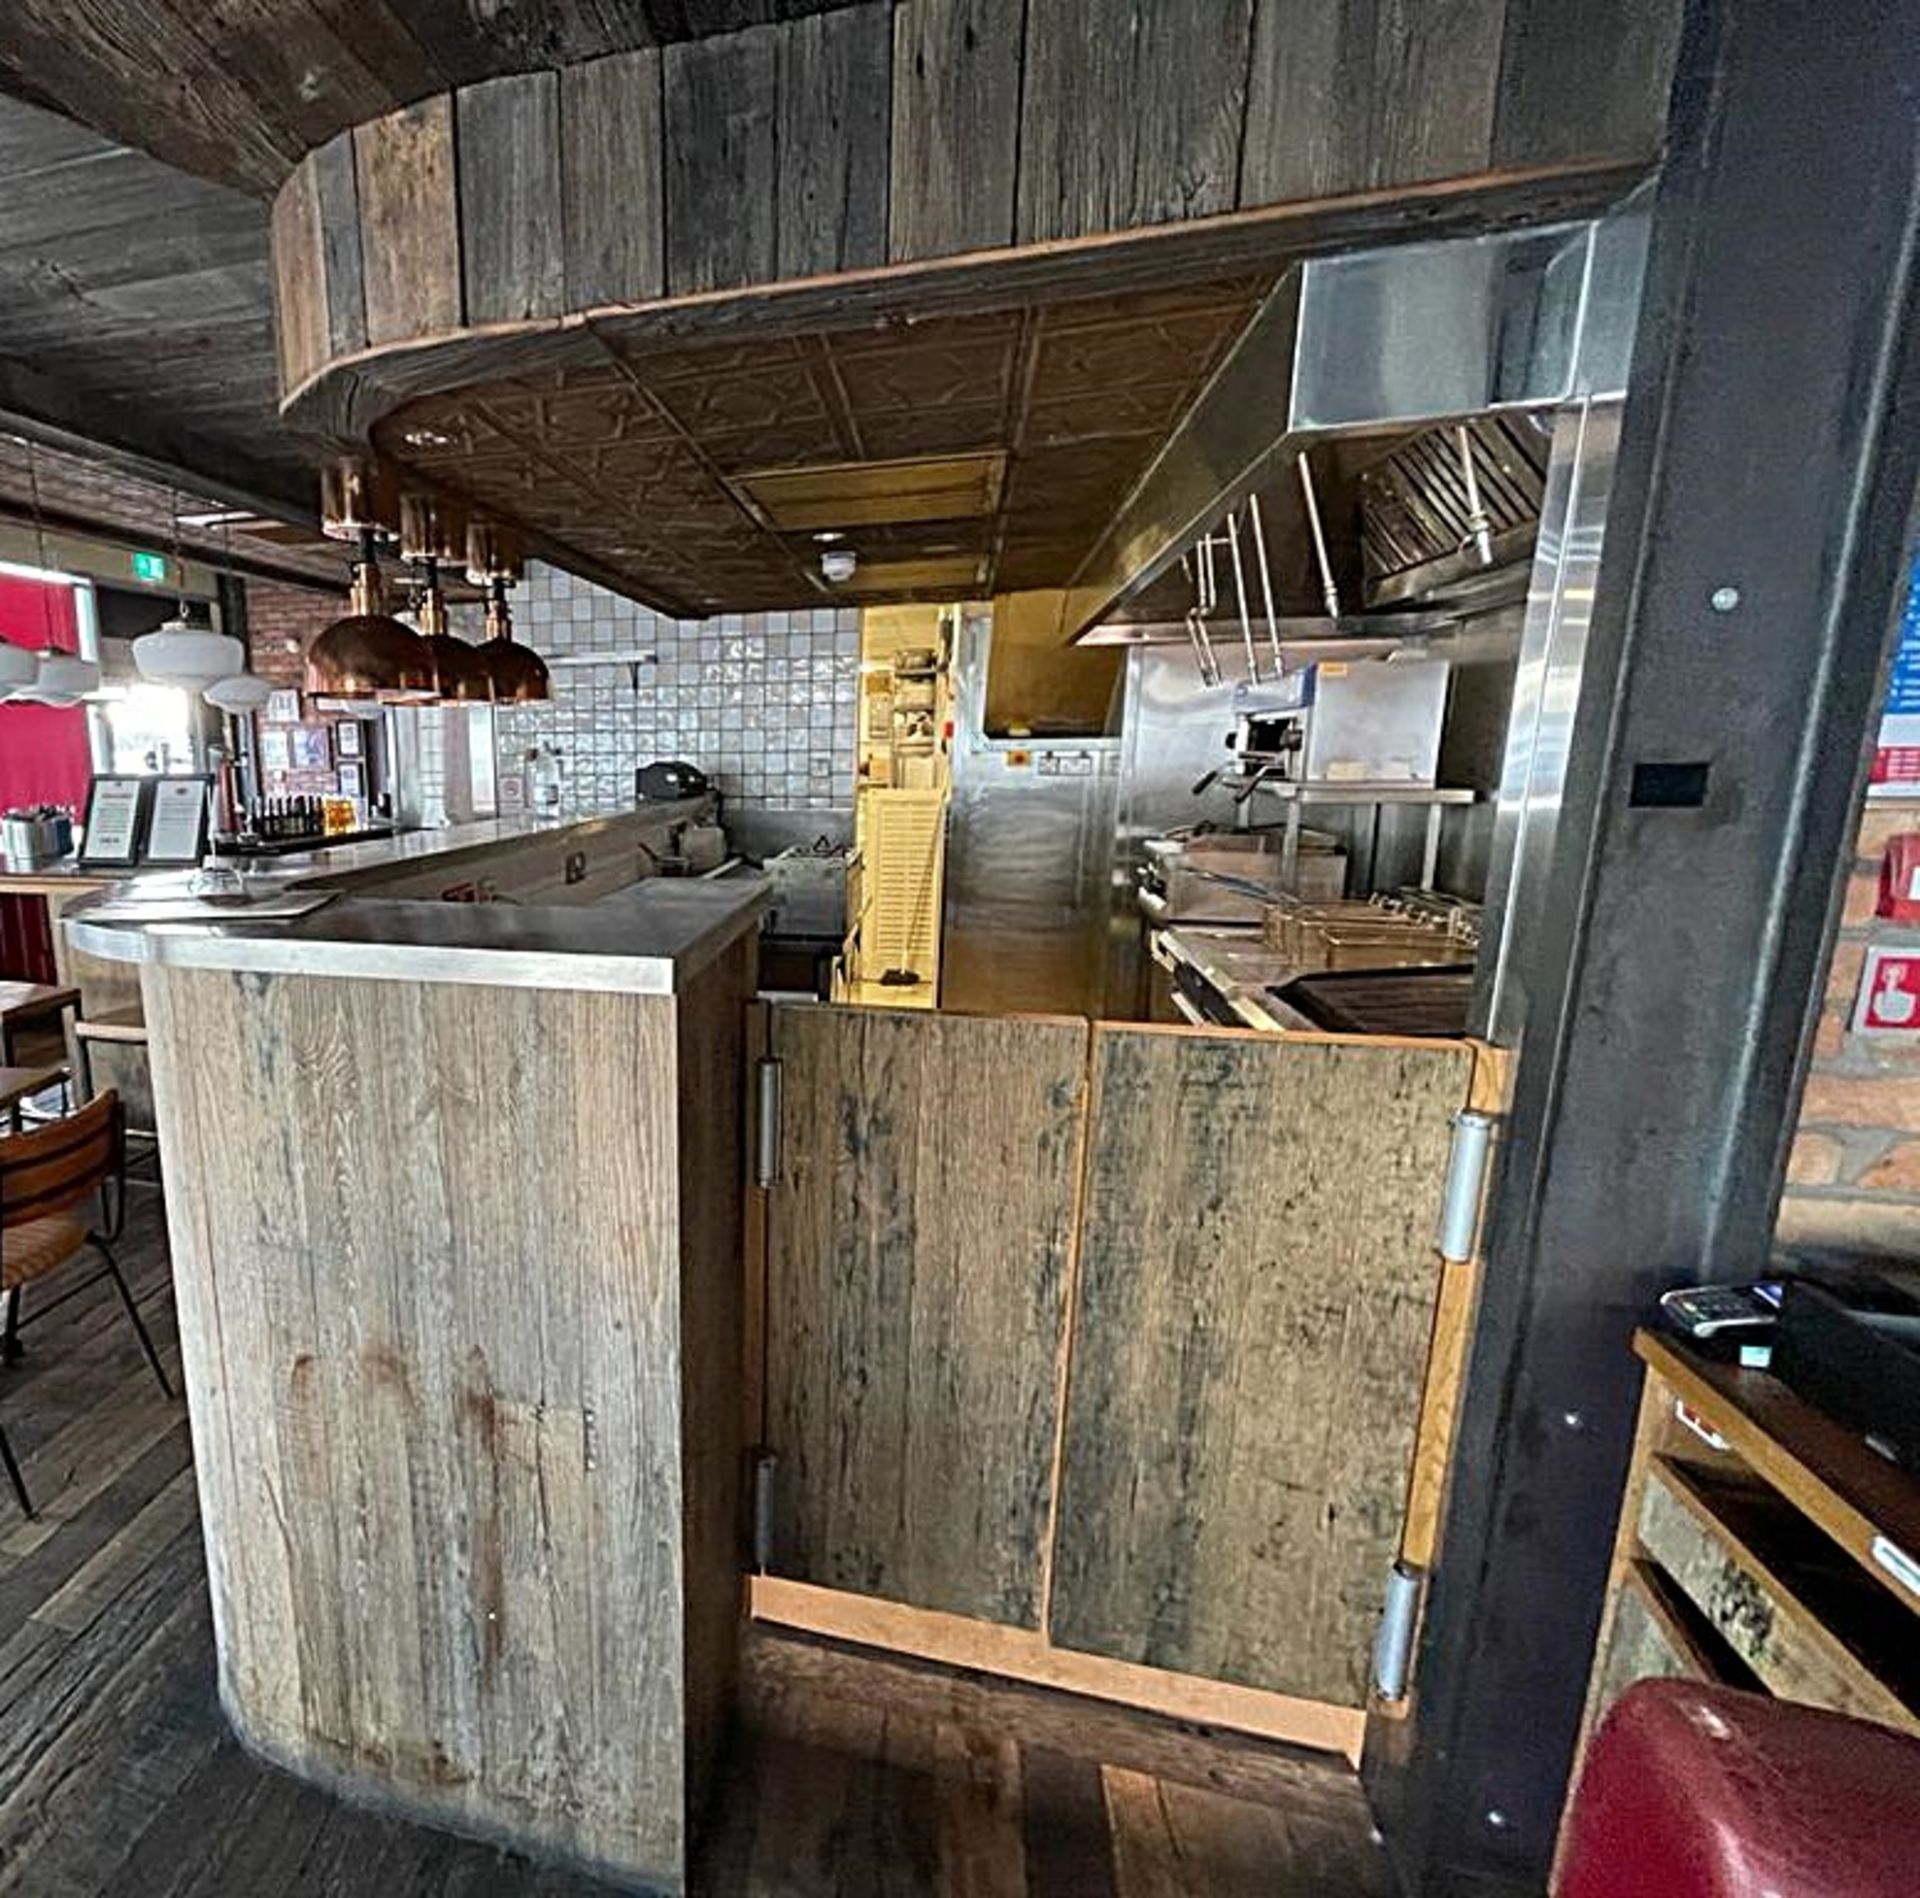 1 x Restaurant Bar With Reclaimed Timber Panelling - Dimensions: H120x600x500cm - BUYER TO REMOVE - Image 5 of 10